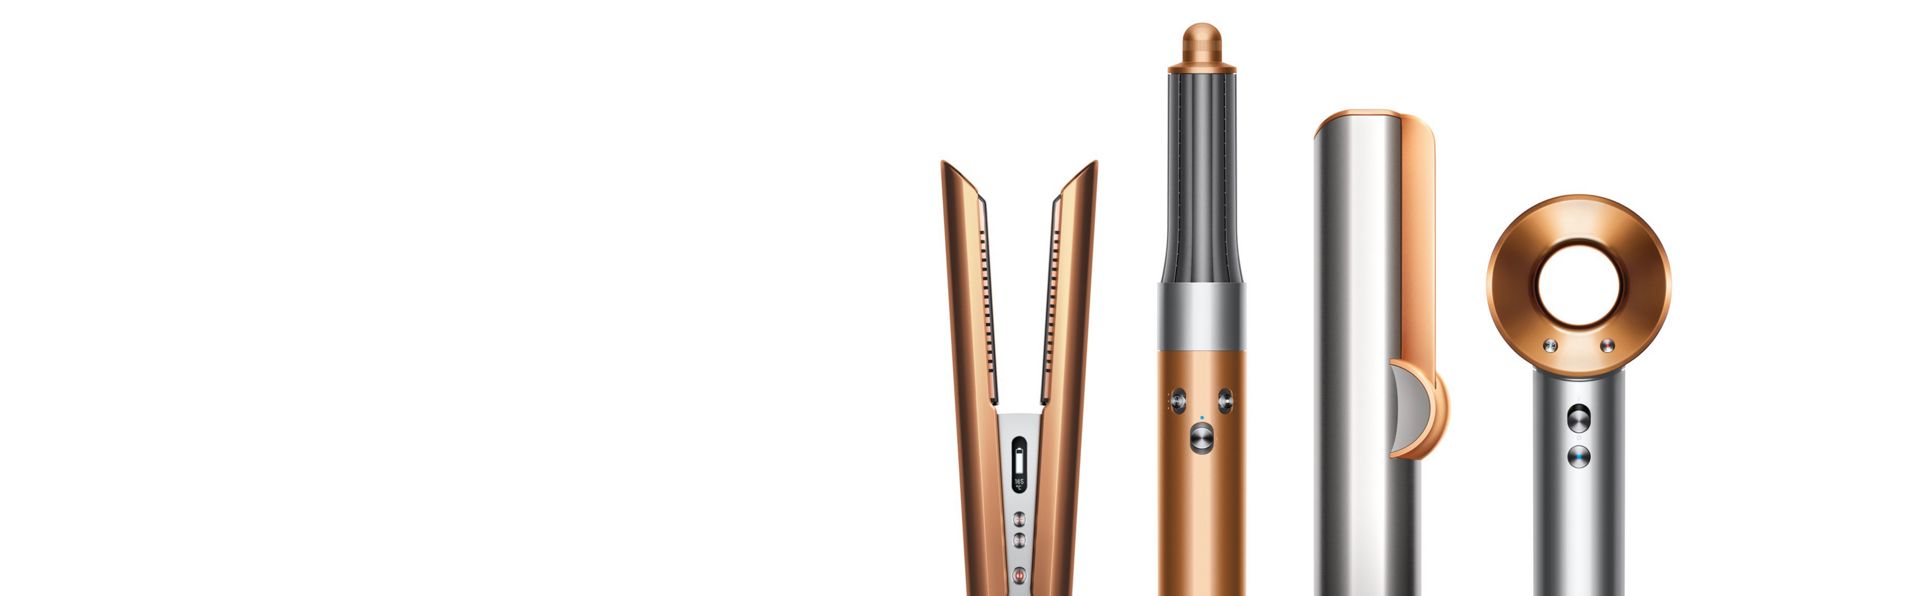 Four Dyson hair care machines in Rich copper and bright nickel colour.